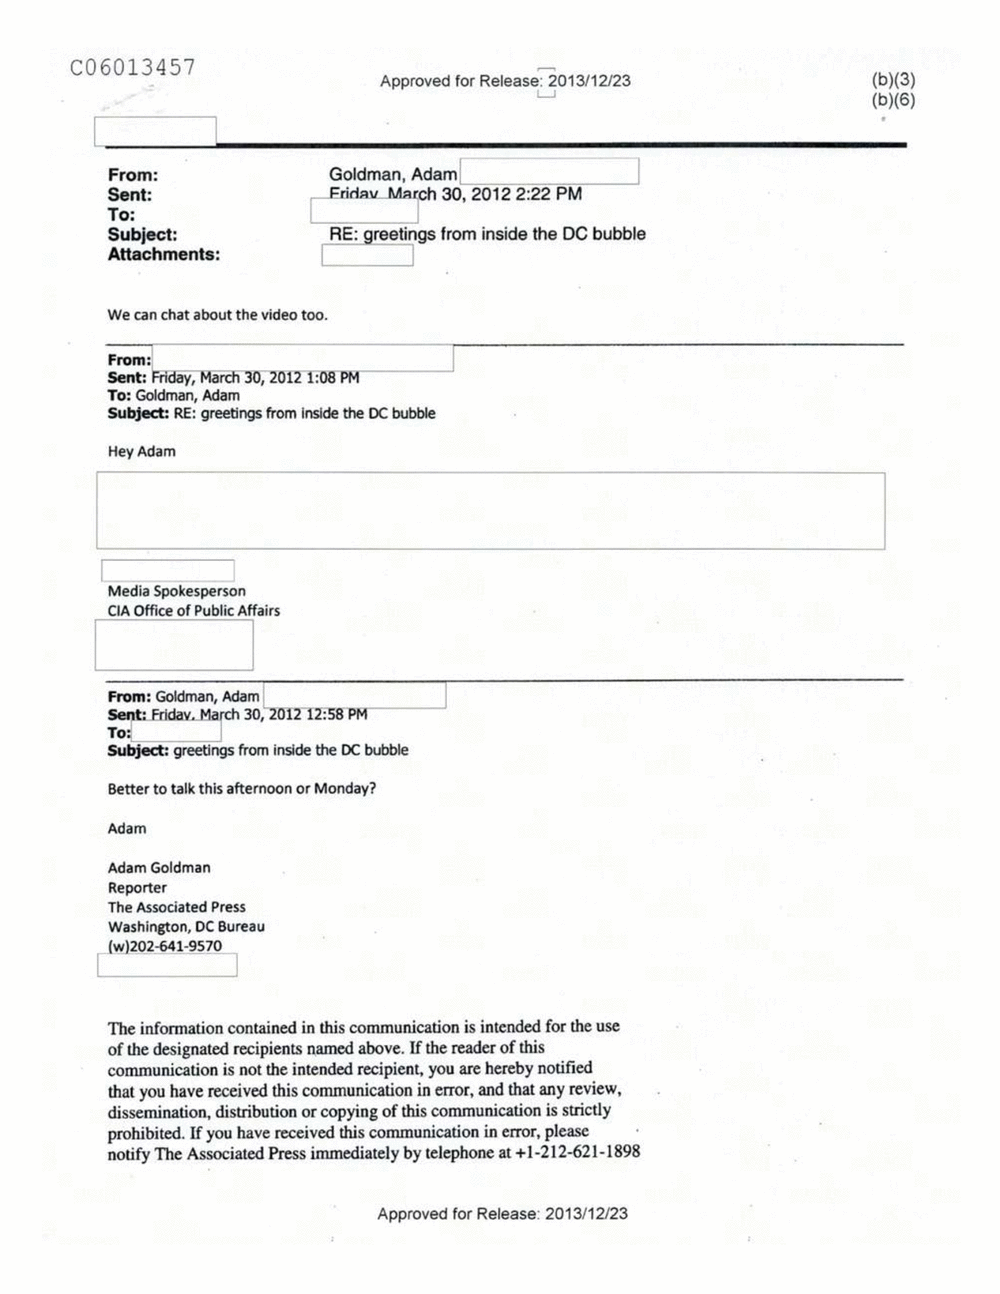 Page 325 from Email Correspondence Between Reporters and CIA Flacks